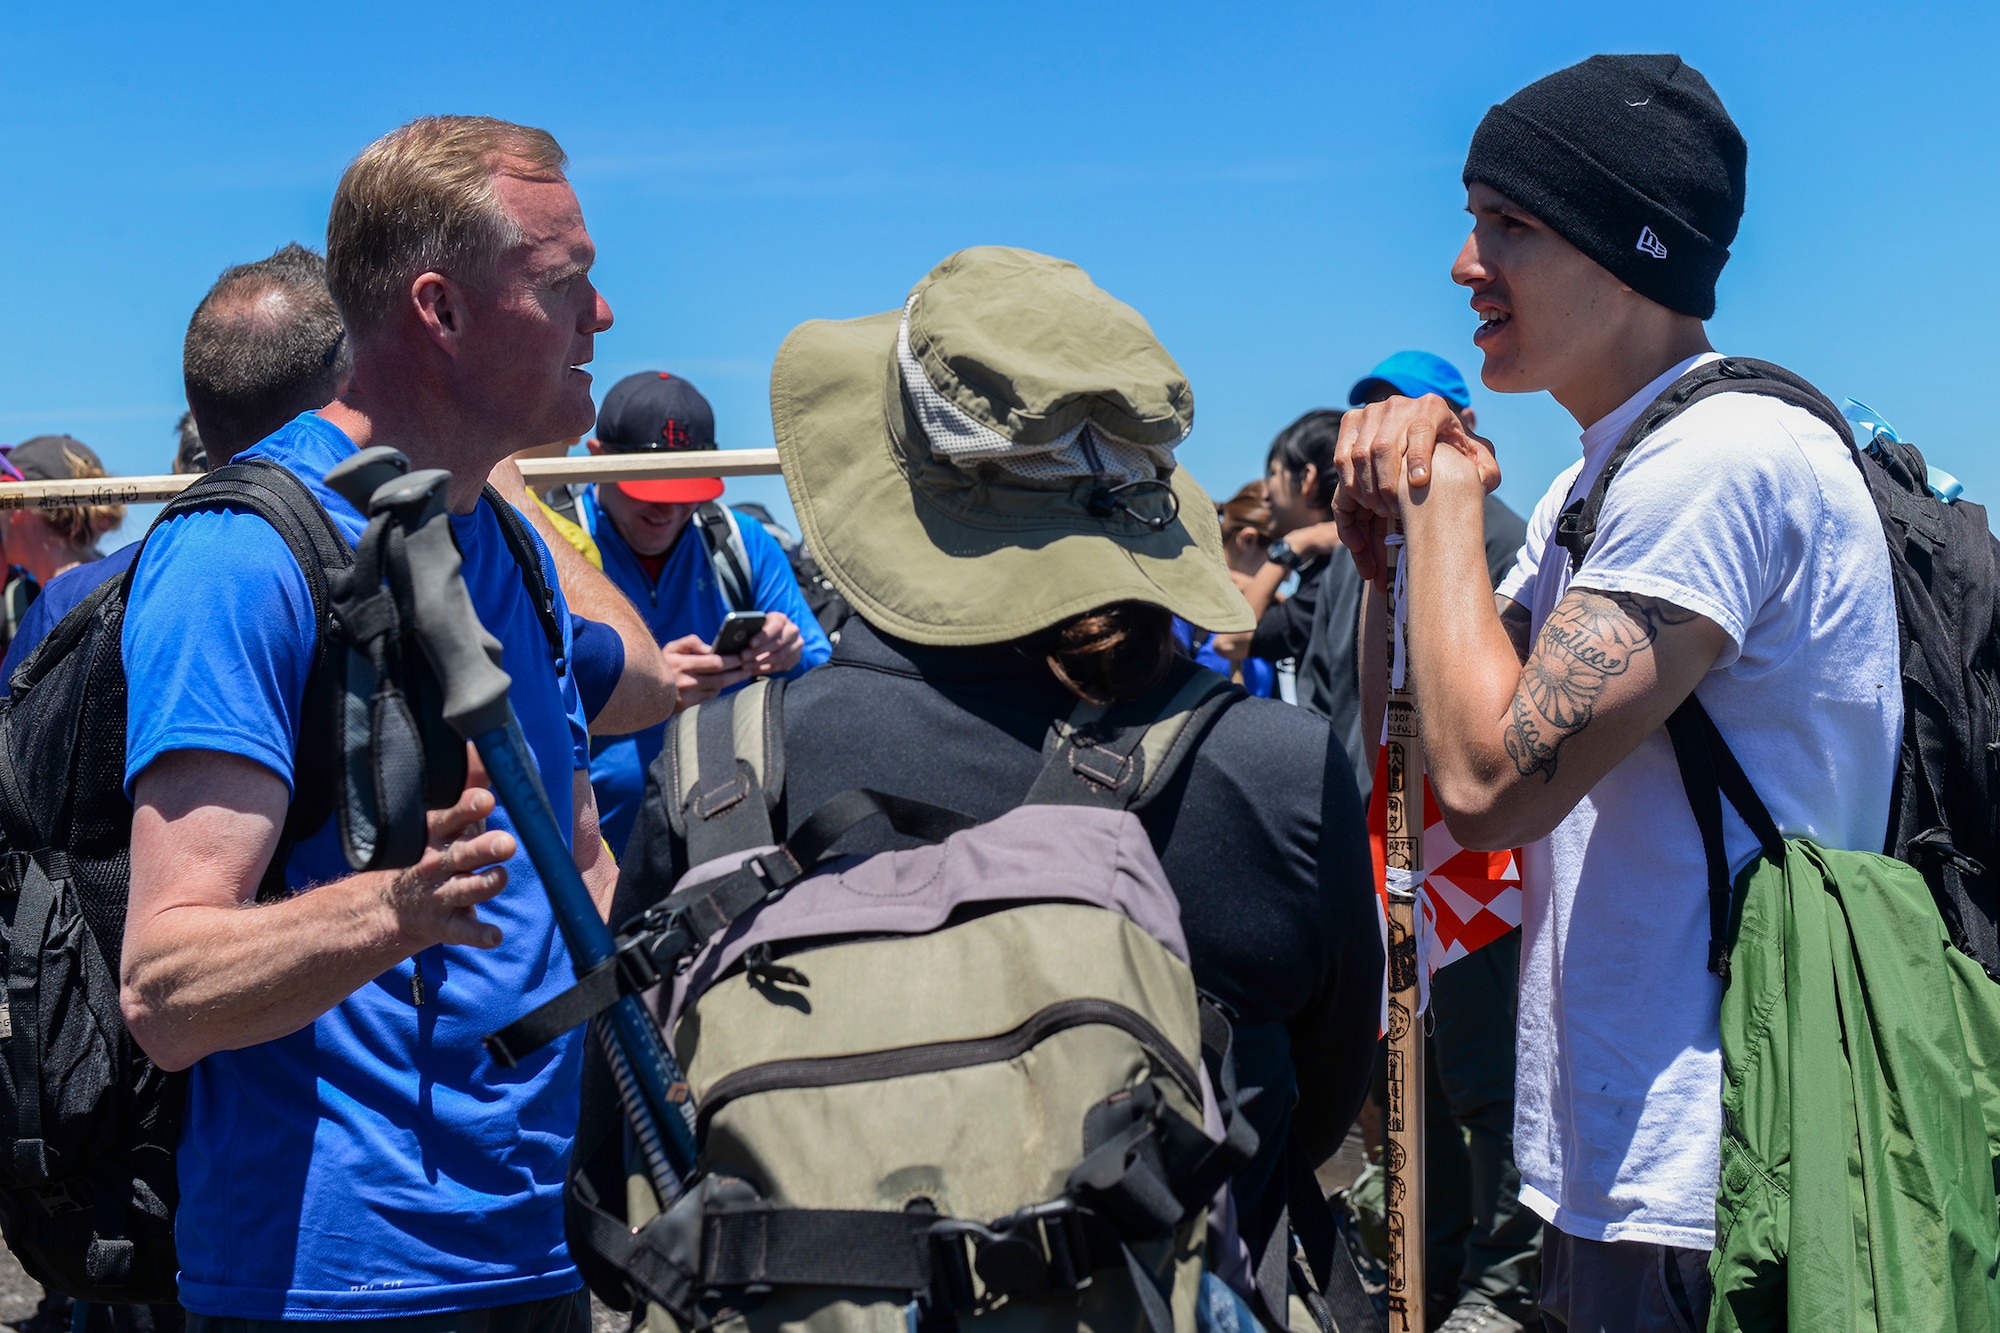 Chief Master Sgt. of the Air Force James A. Cody talks with Airmen after climbing to the summit of Mount Fuji, Japan, July 11, 2015. After climbing to the summit, Cody spent time socializing with the rest of the hikers. (U.S. Air Force photo/Airman 1st Class Elizabeth Baker)